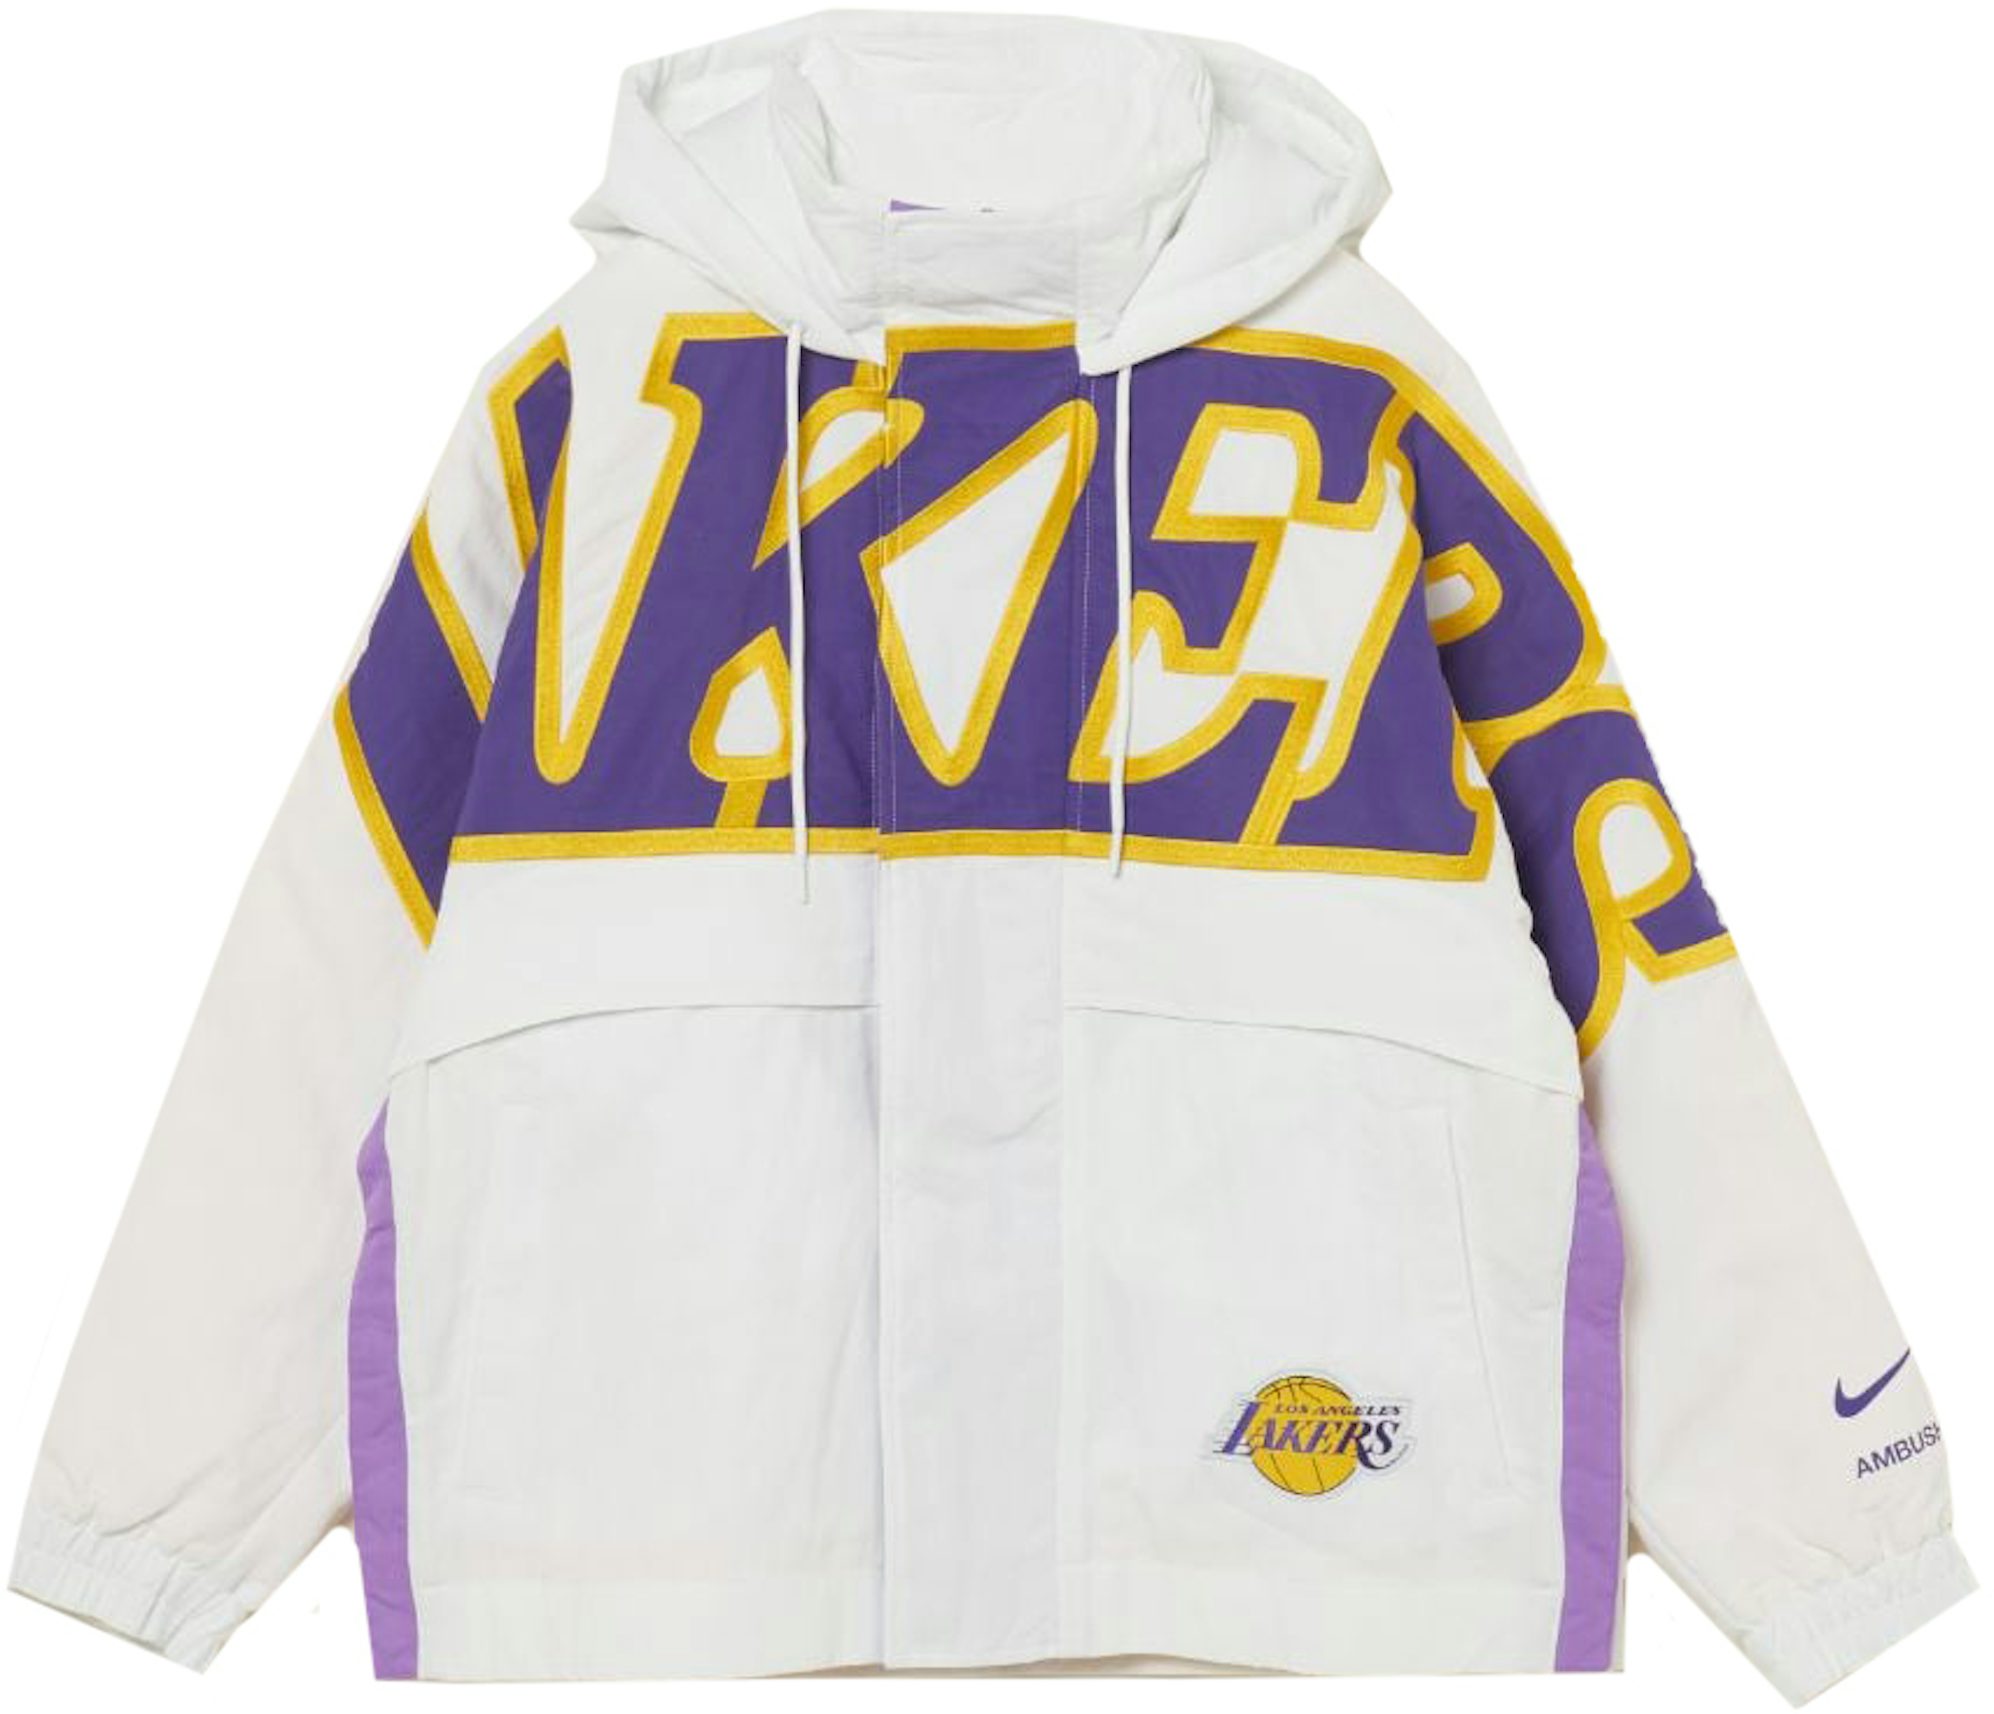 Nike BB Lakers Jacket, Where To Buy